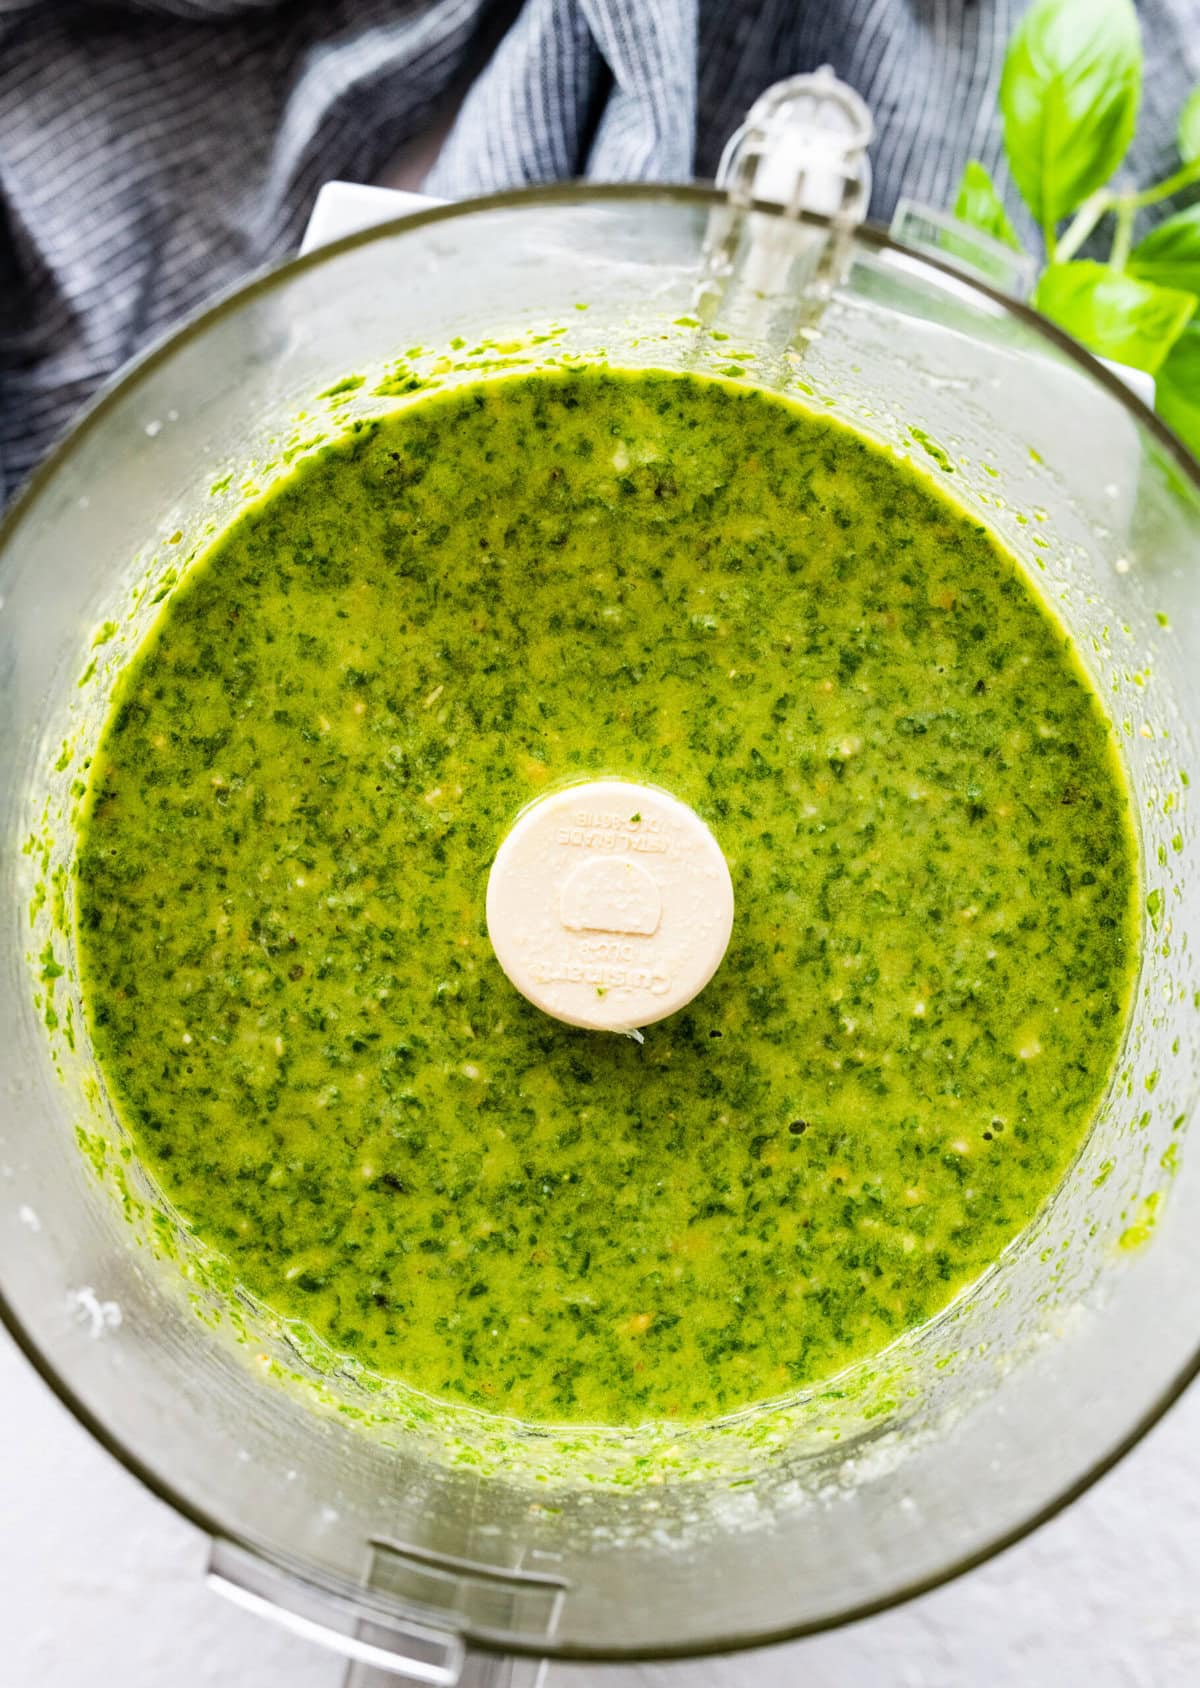 how to make basil pesto- blend the ingredients until smooth.